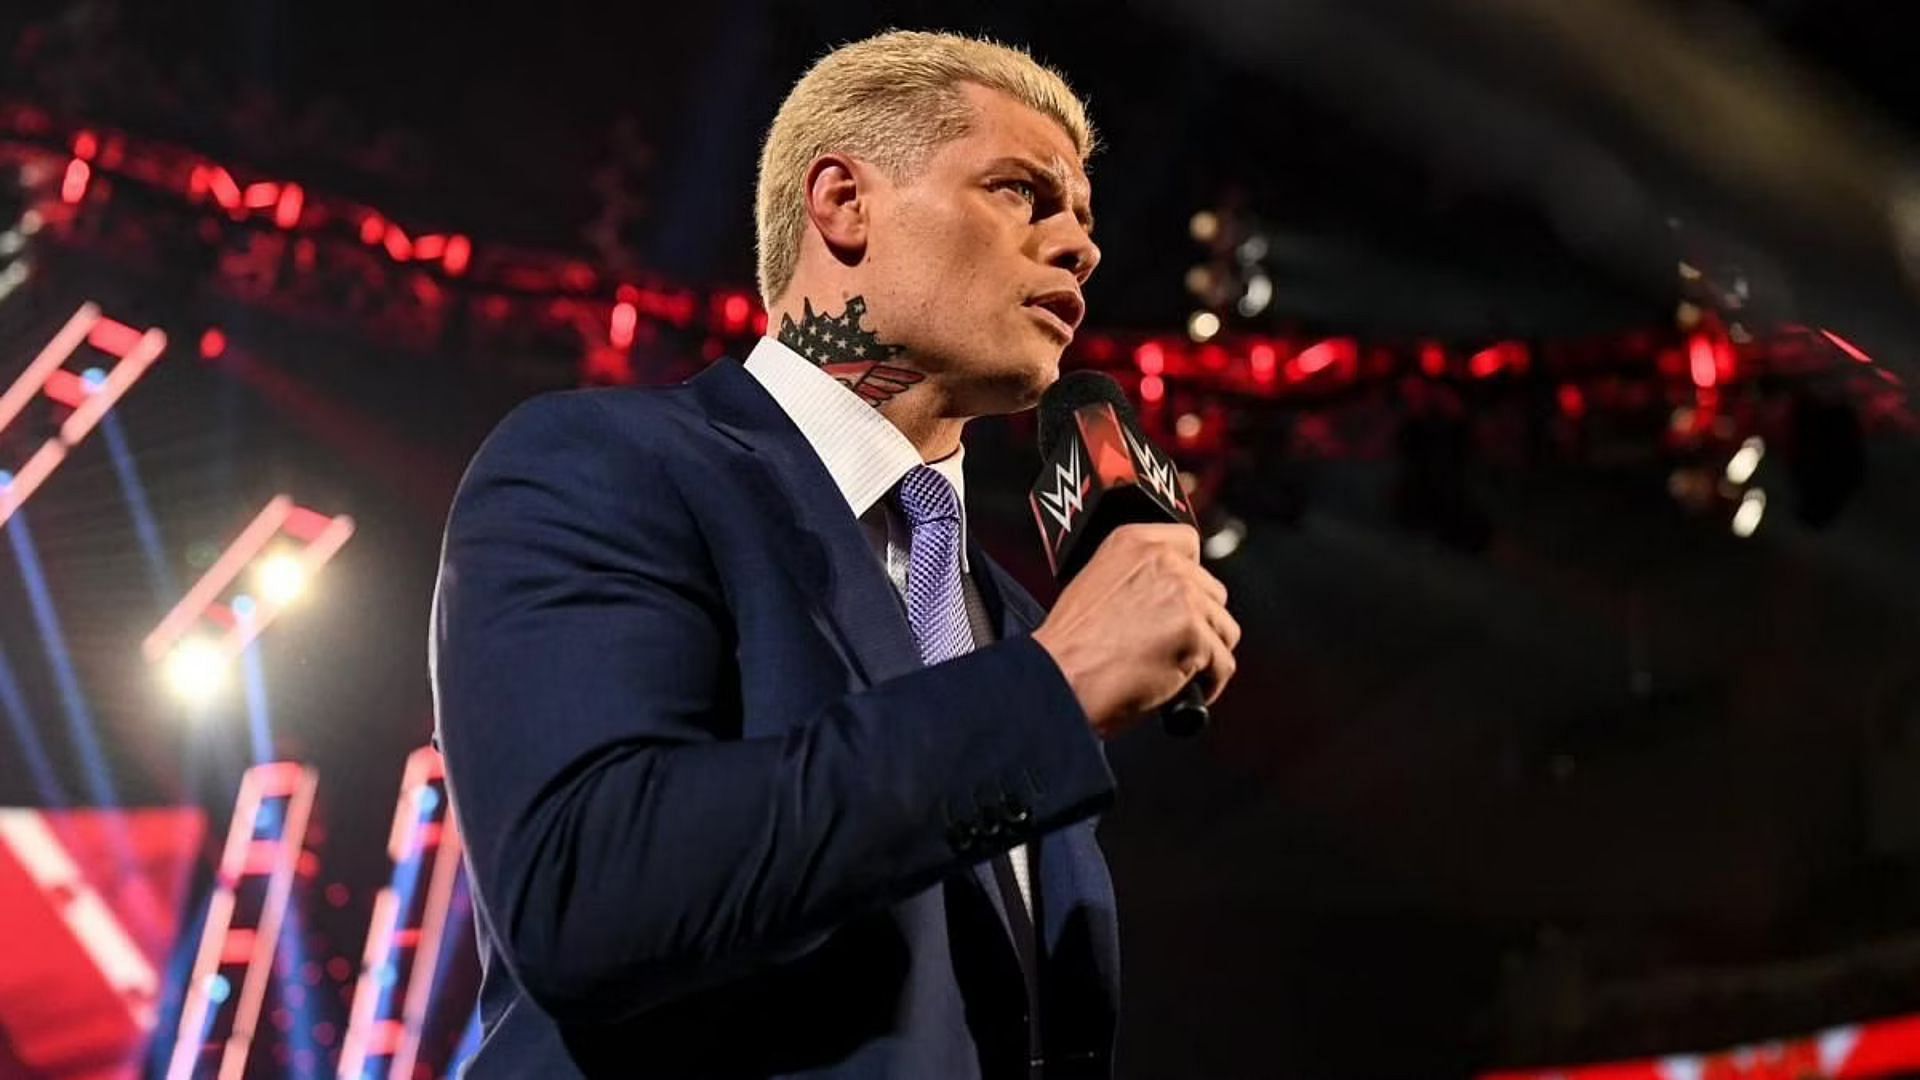 Cody Rhodes made his WWE return at WrestleMania 38 last month